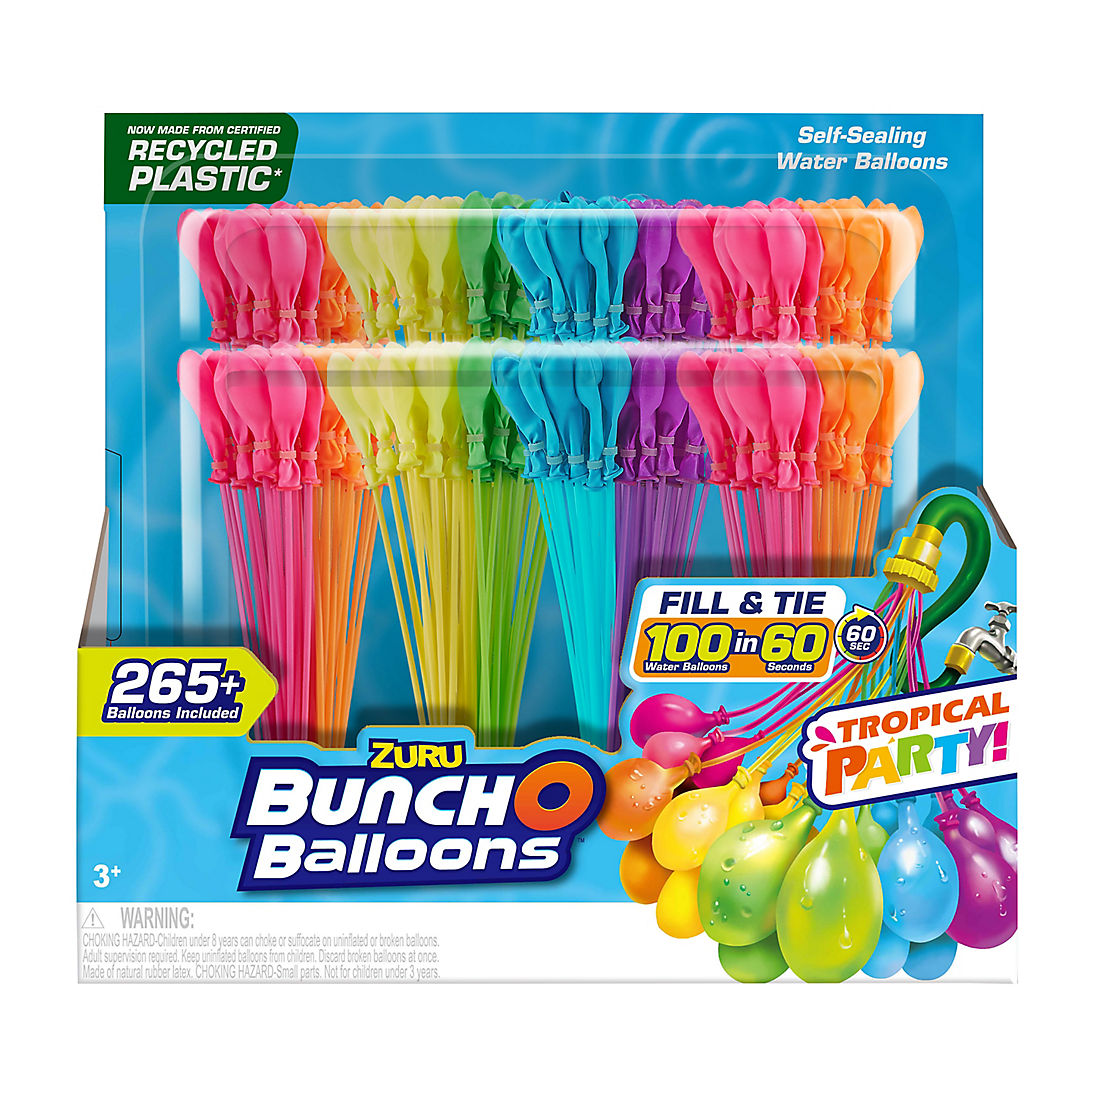 Bunch Water Balloon refill 120---Pack of One Biodegradable Magic Water Balloons 